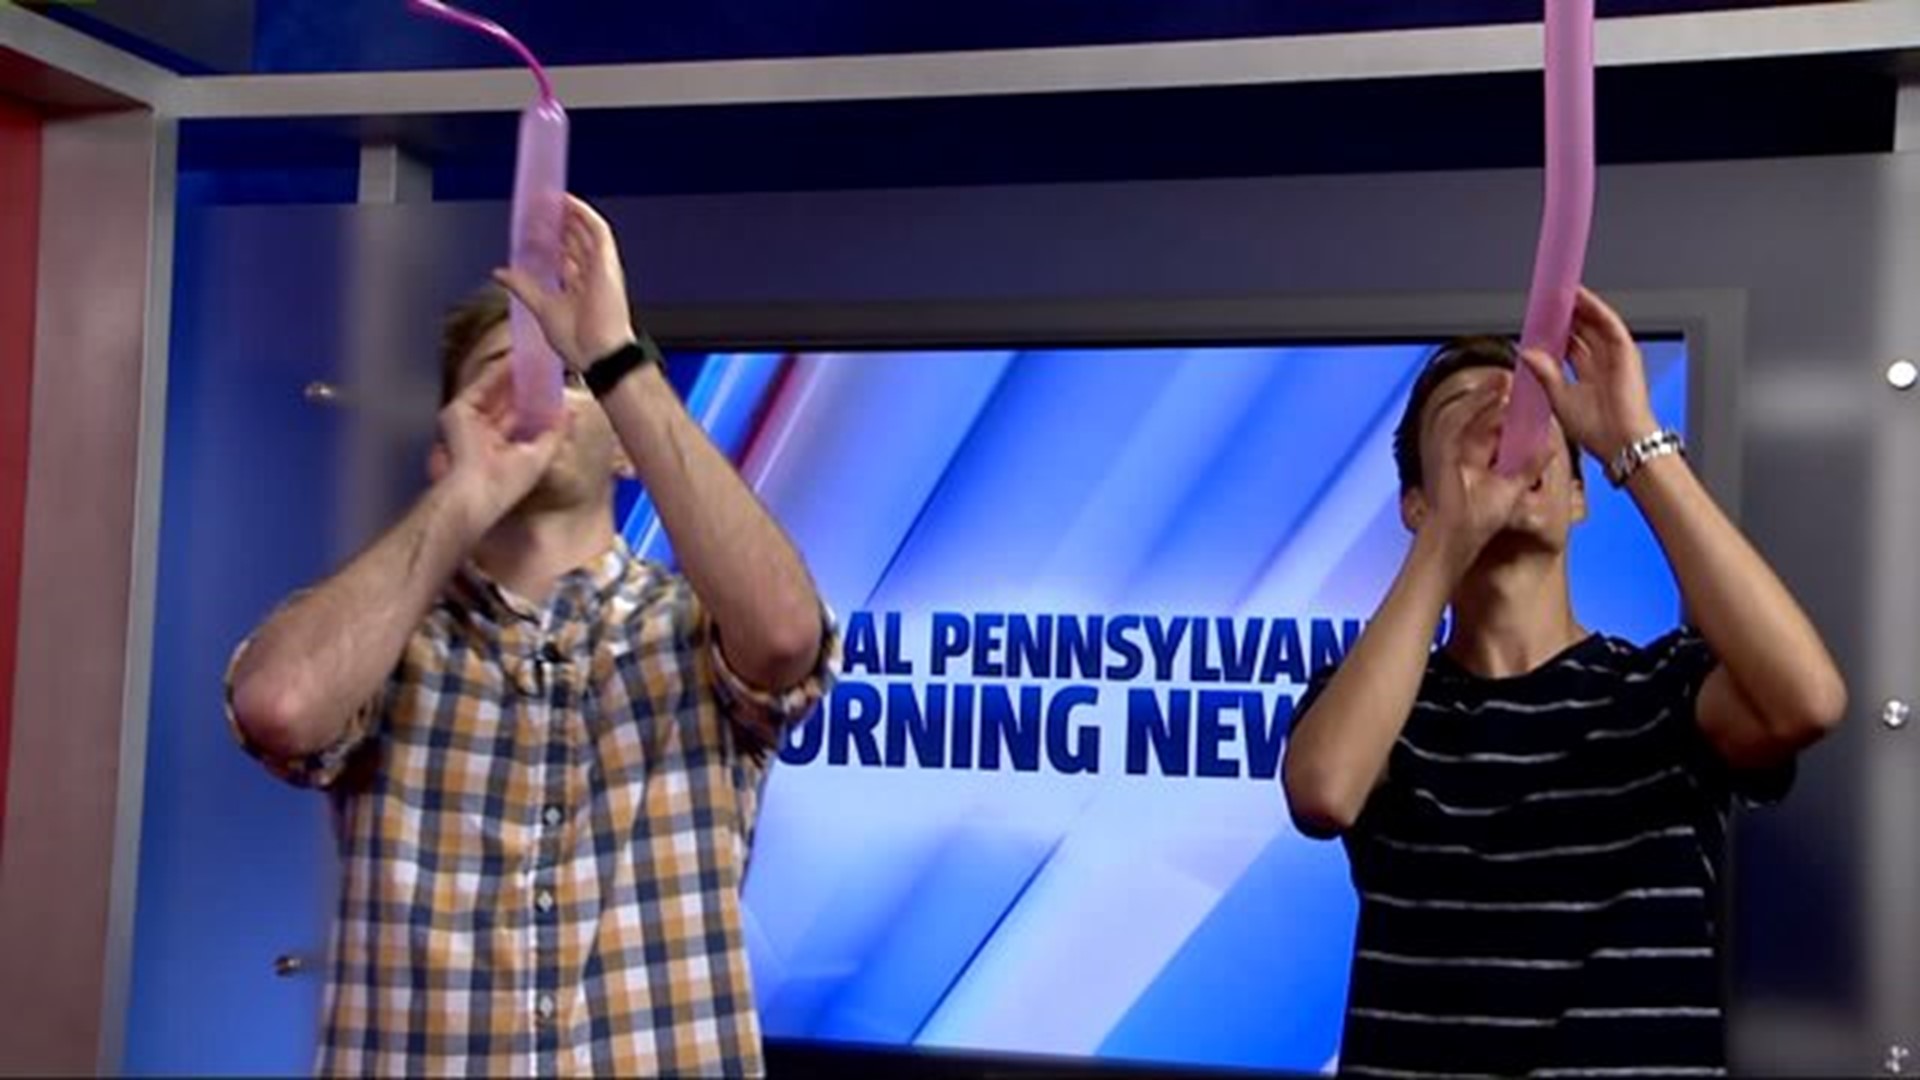 Swallowing a balloon on live television